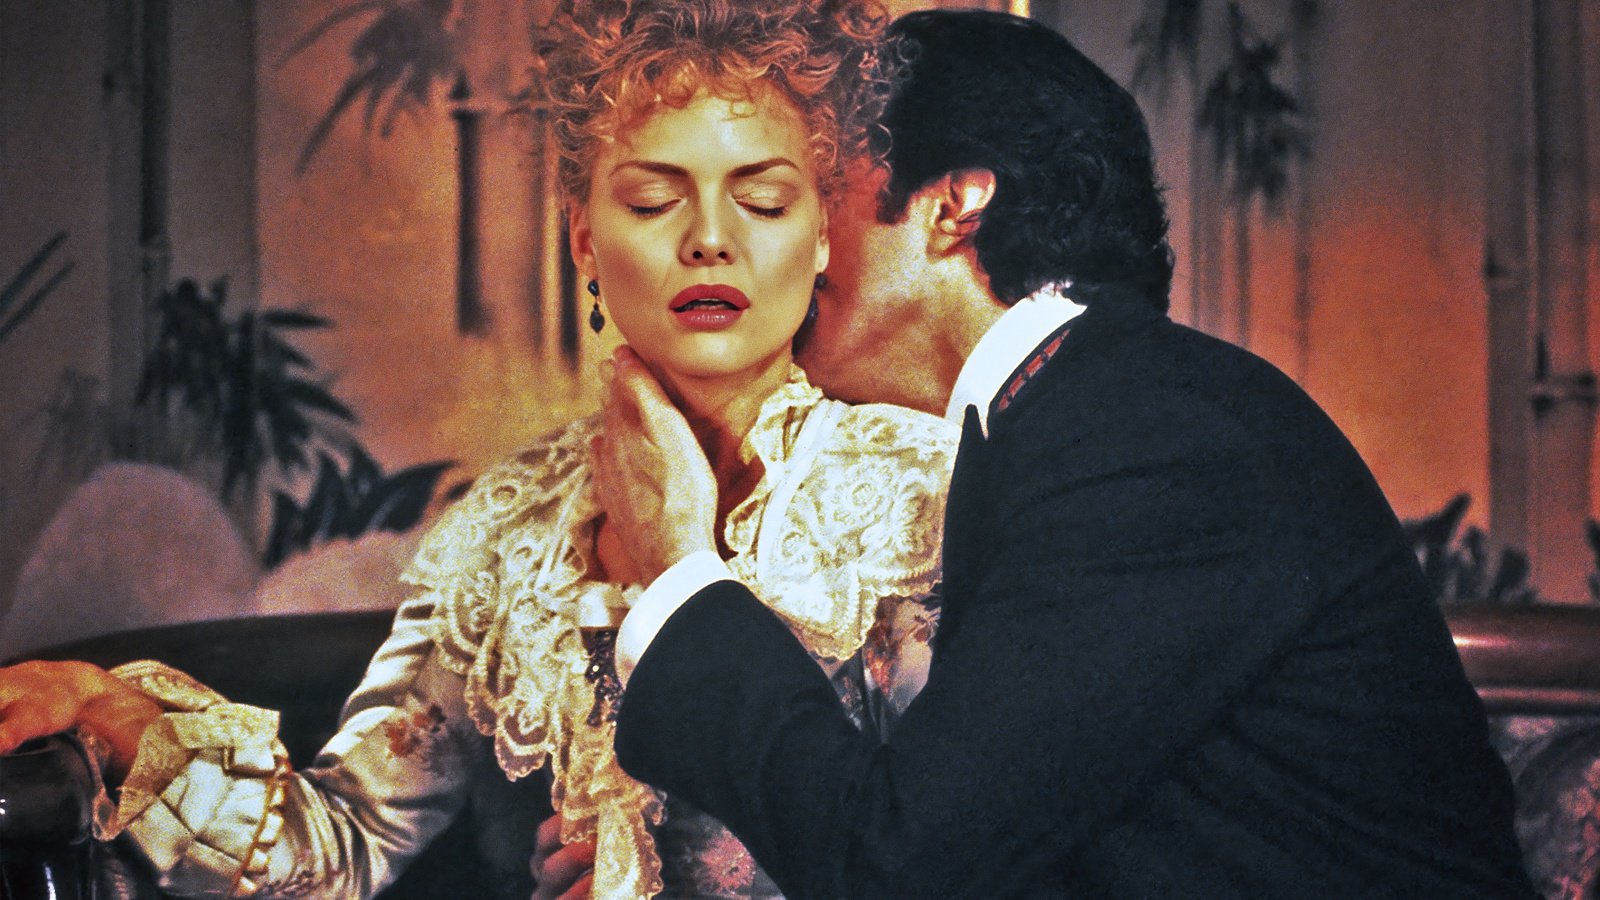 The Age of Innocence: Passion by Martin Scorsese